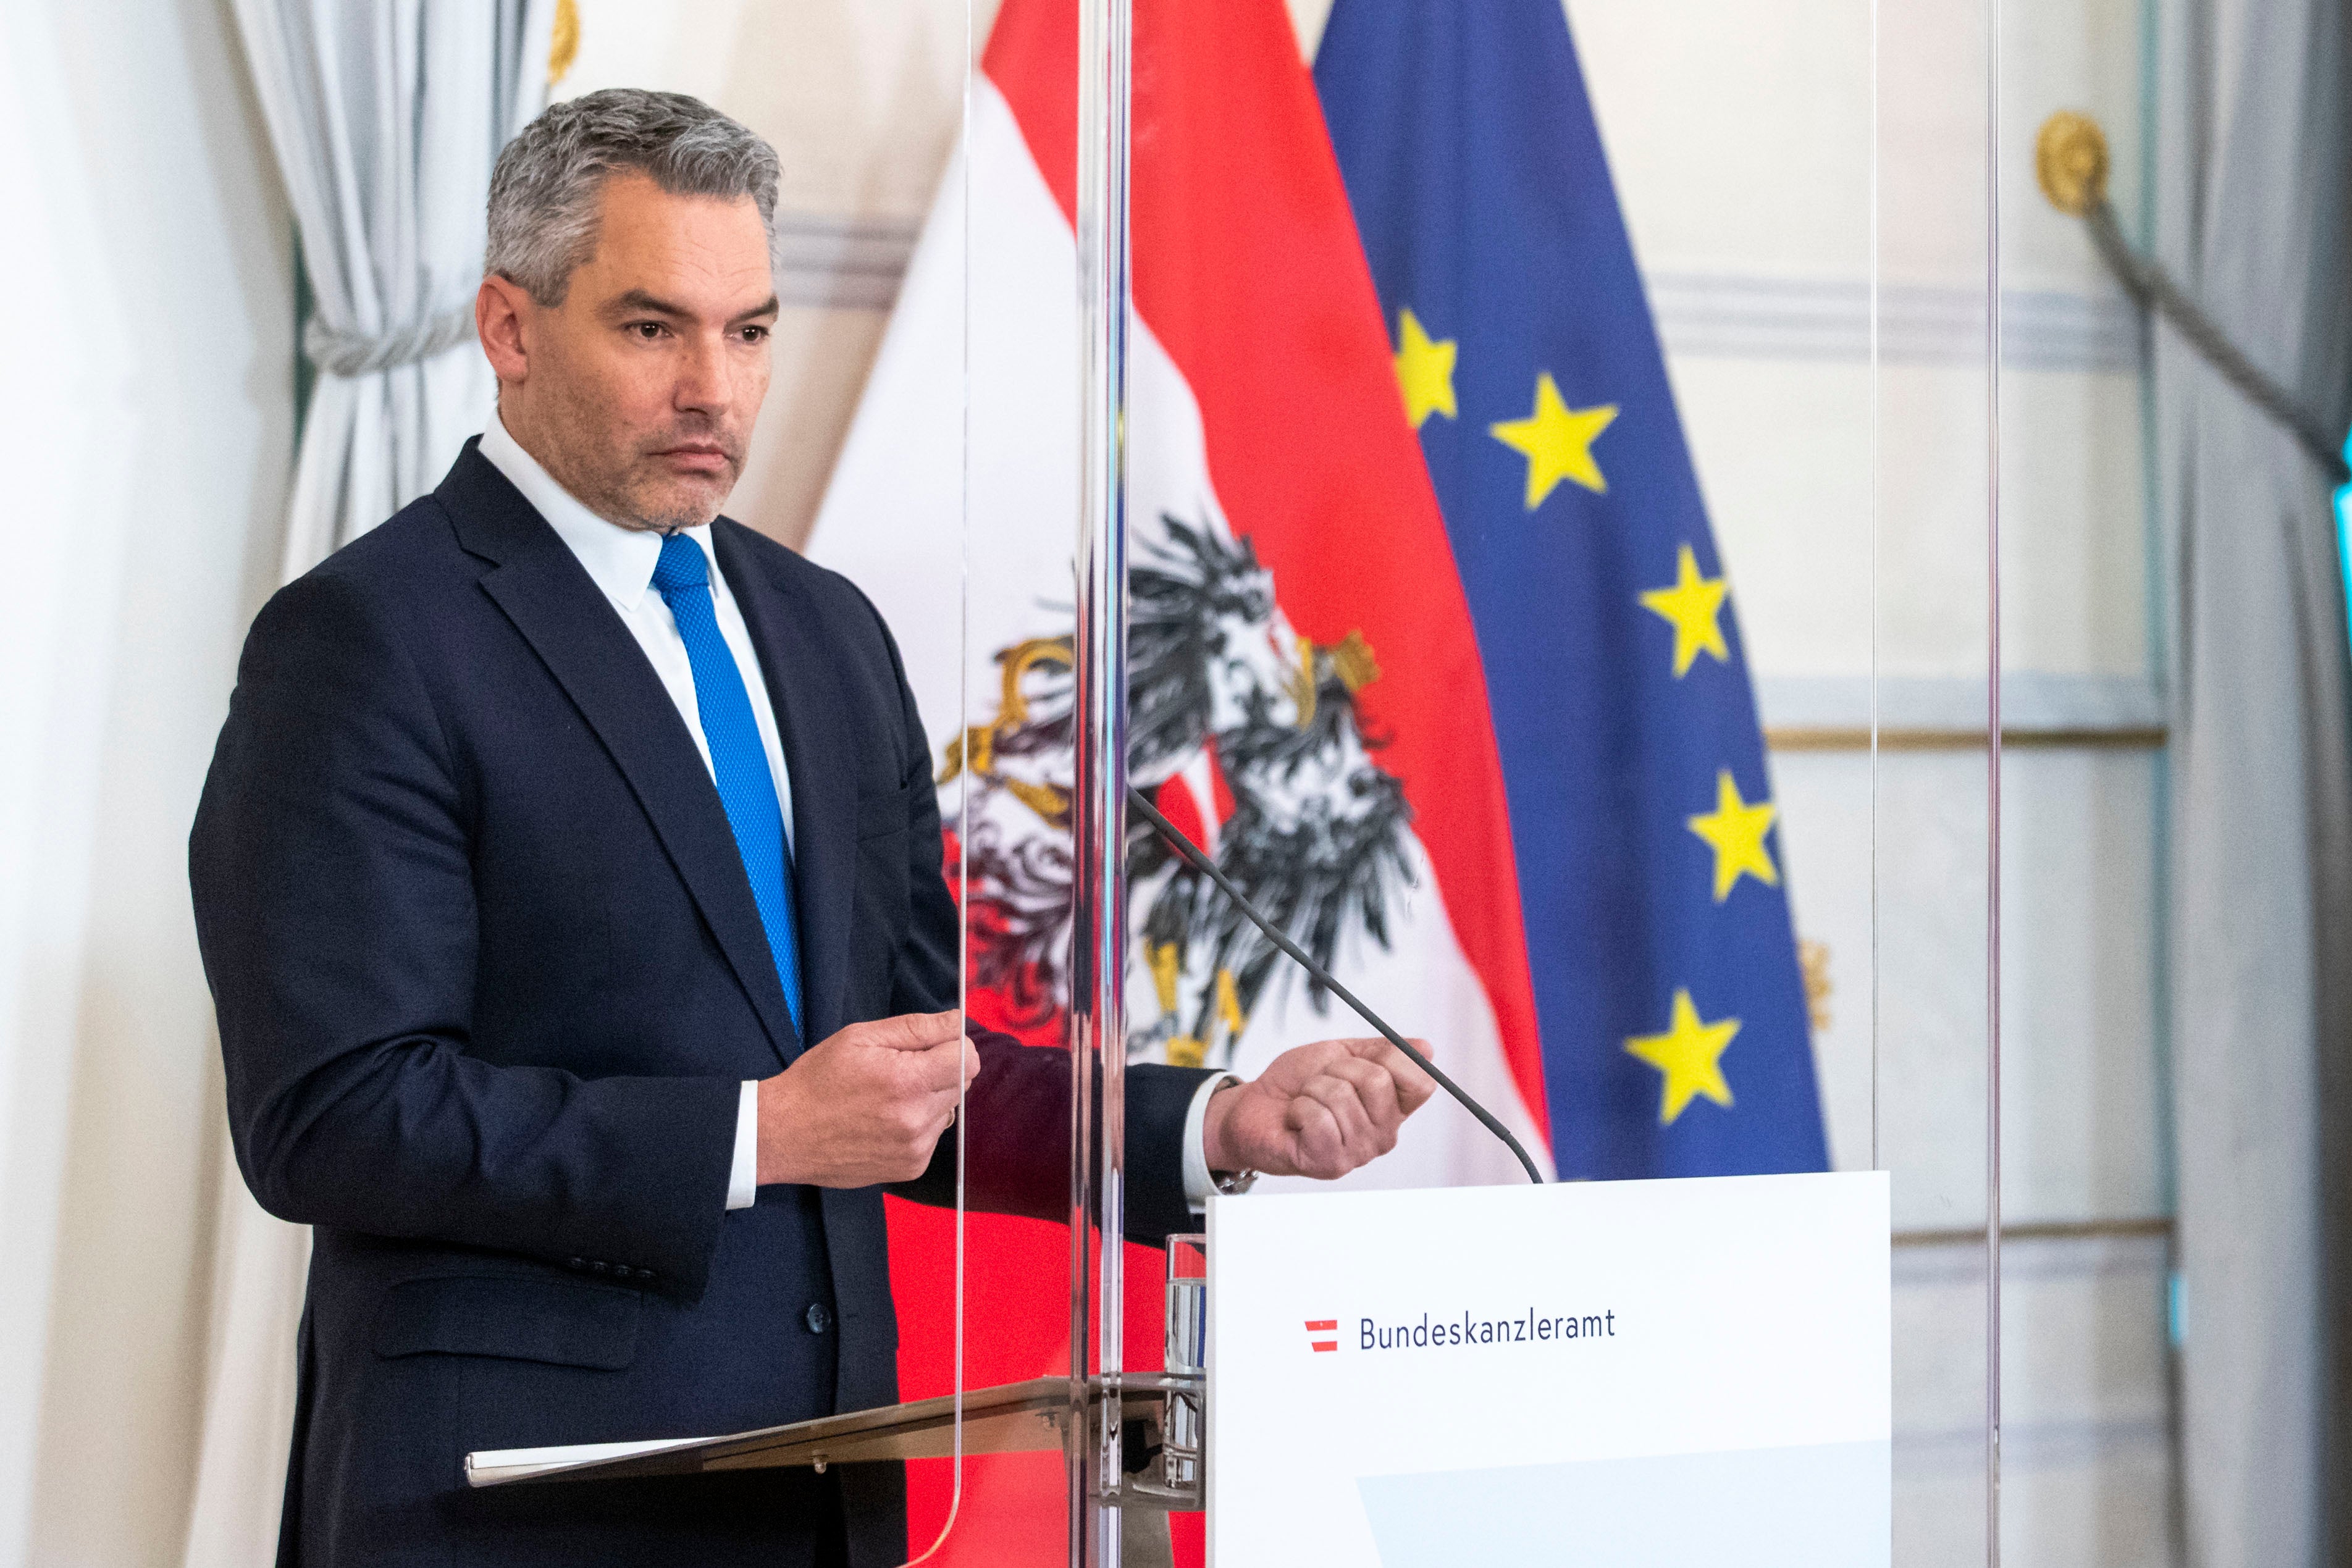 The new Austrian Chancellor Karl Nehammer speaks at a news conference in Vienna